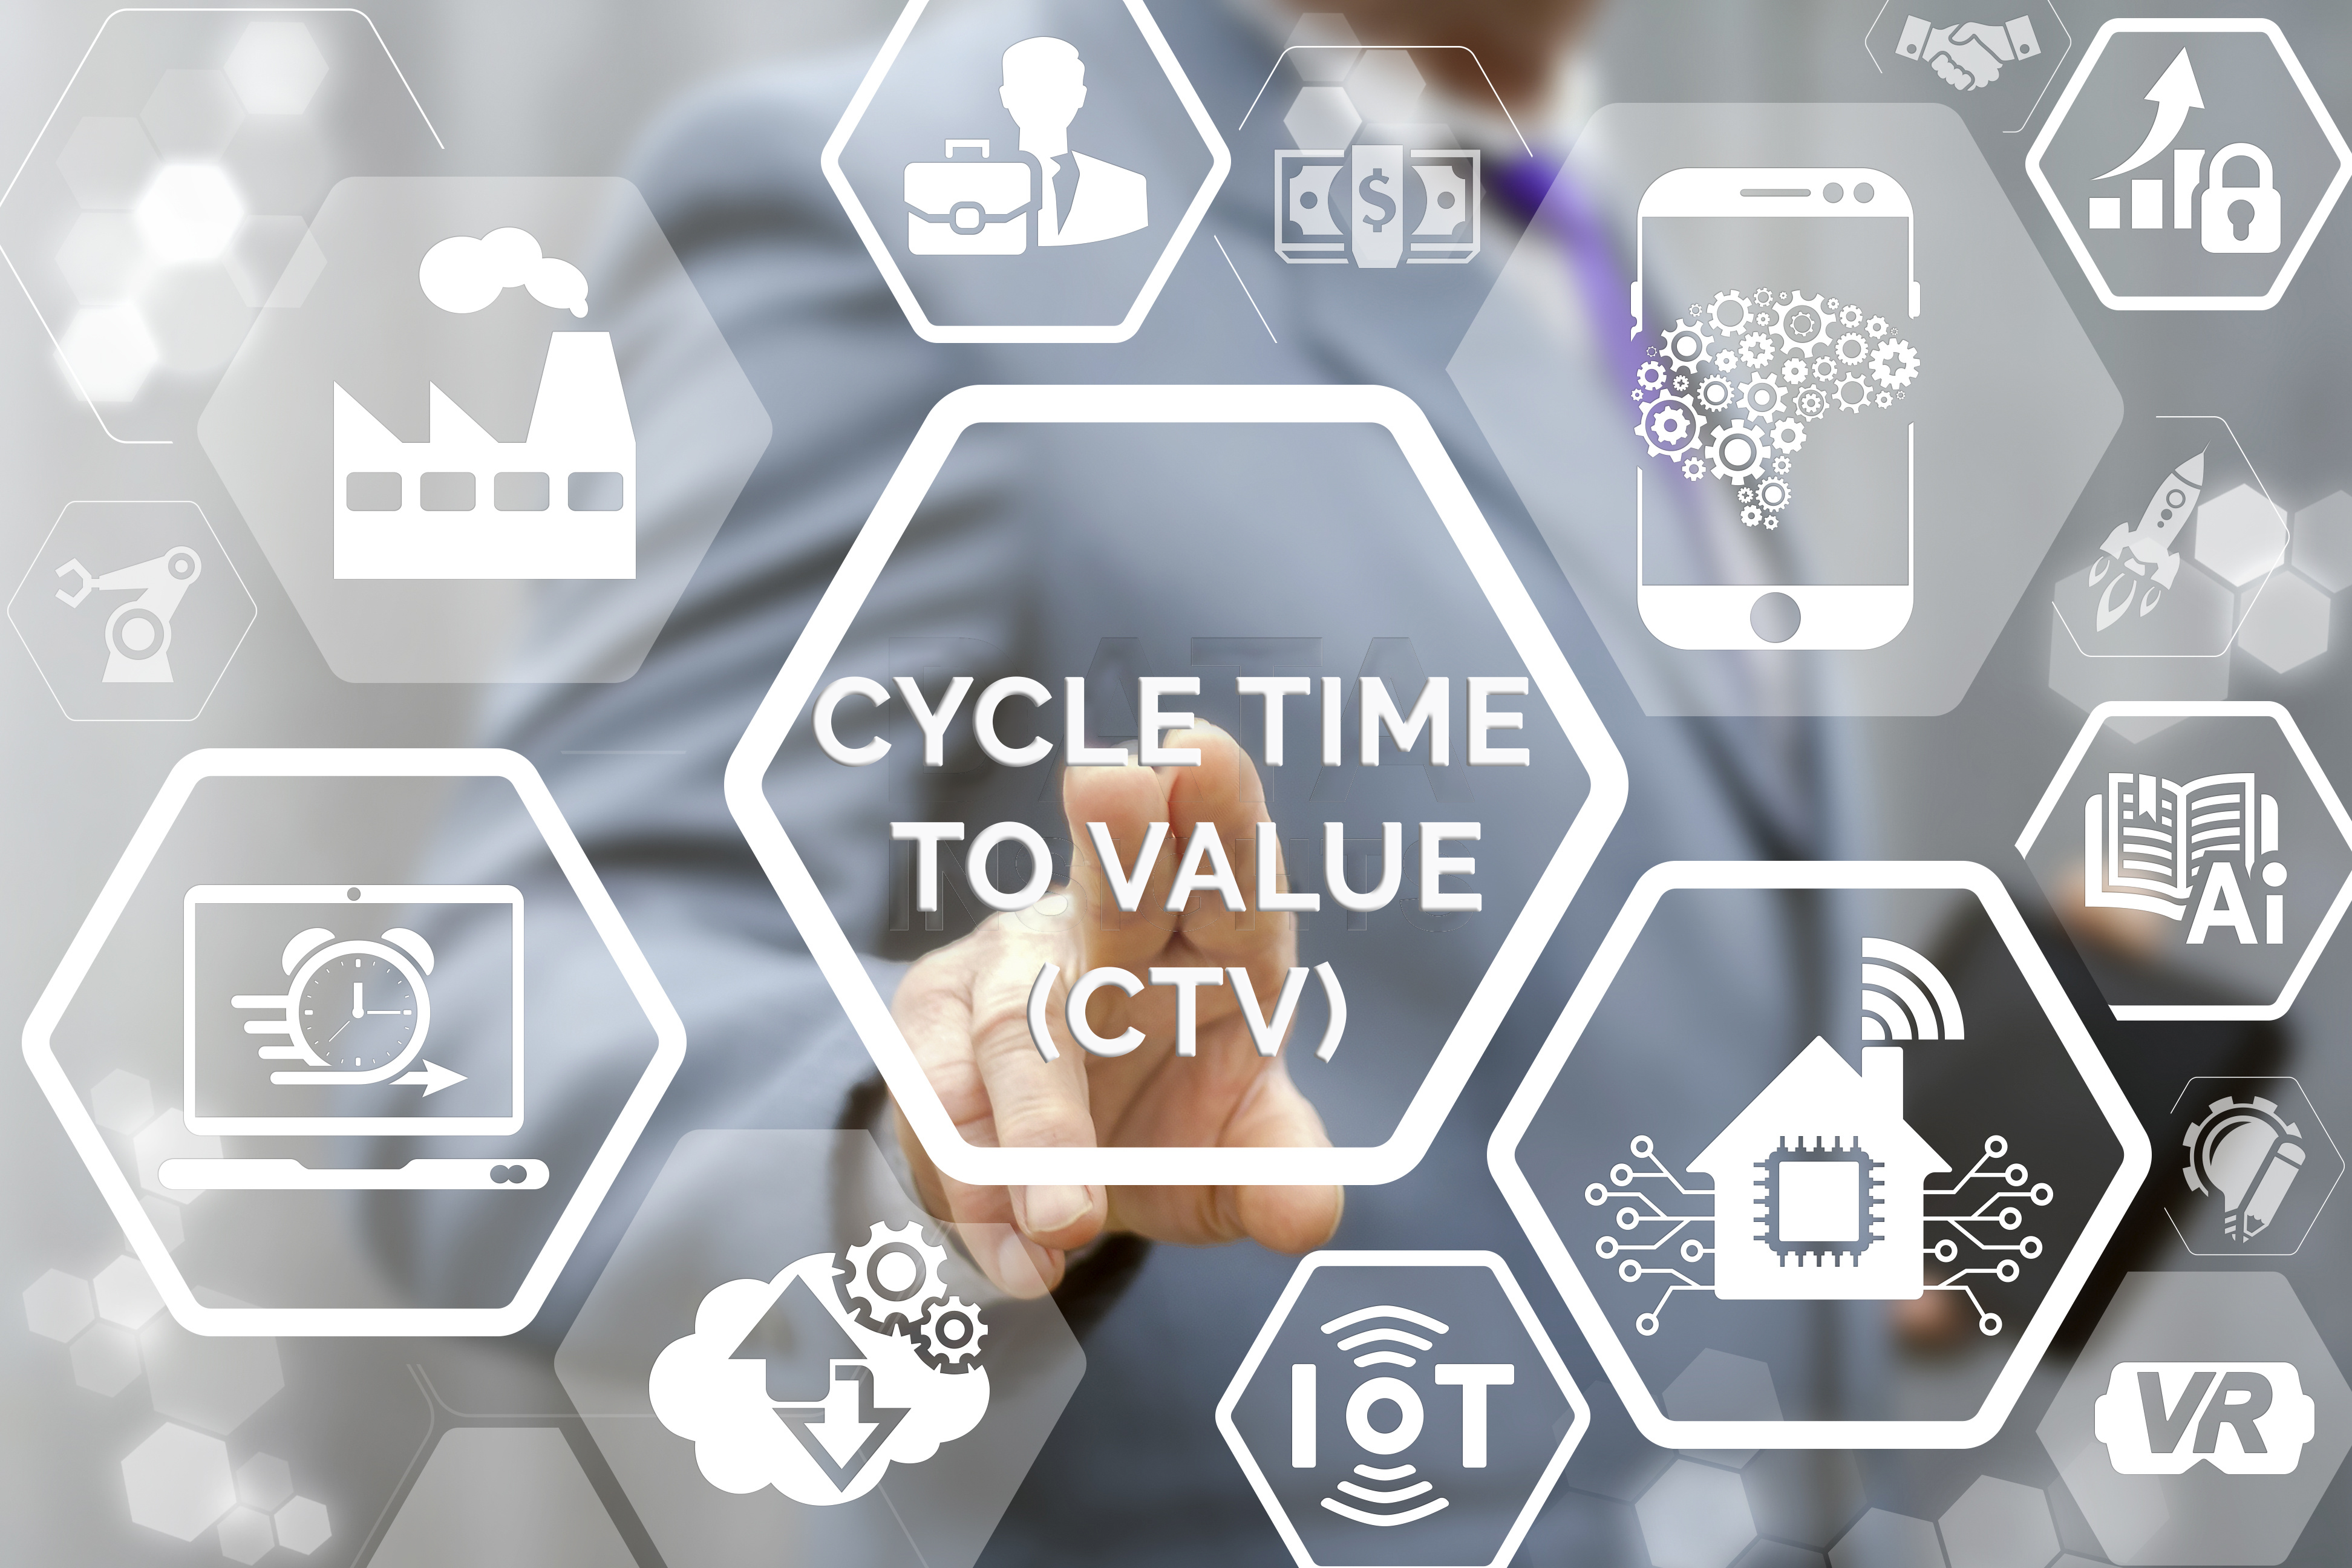 Cycle Time to Value integrated into your business